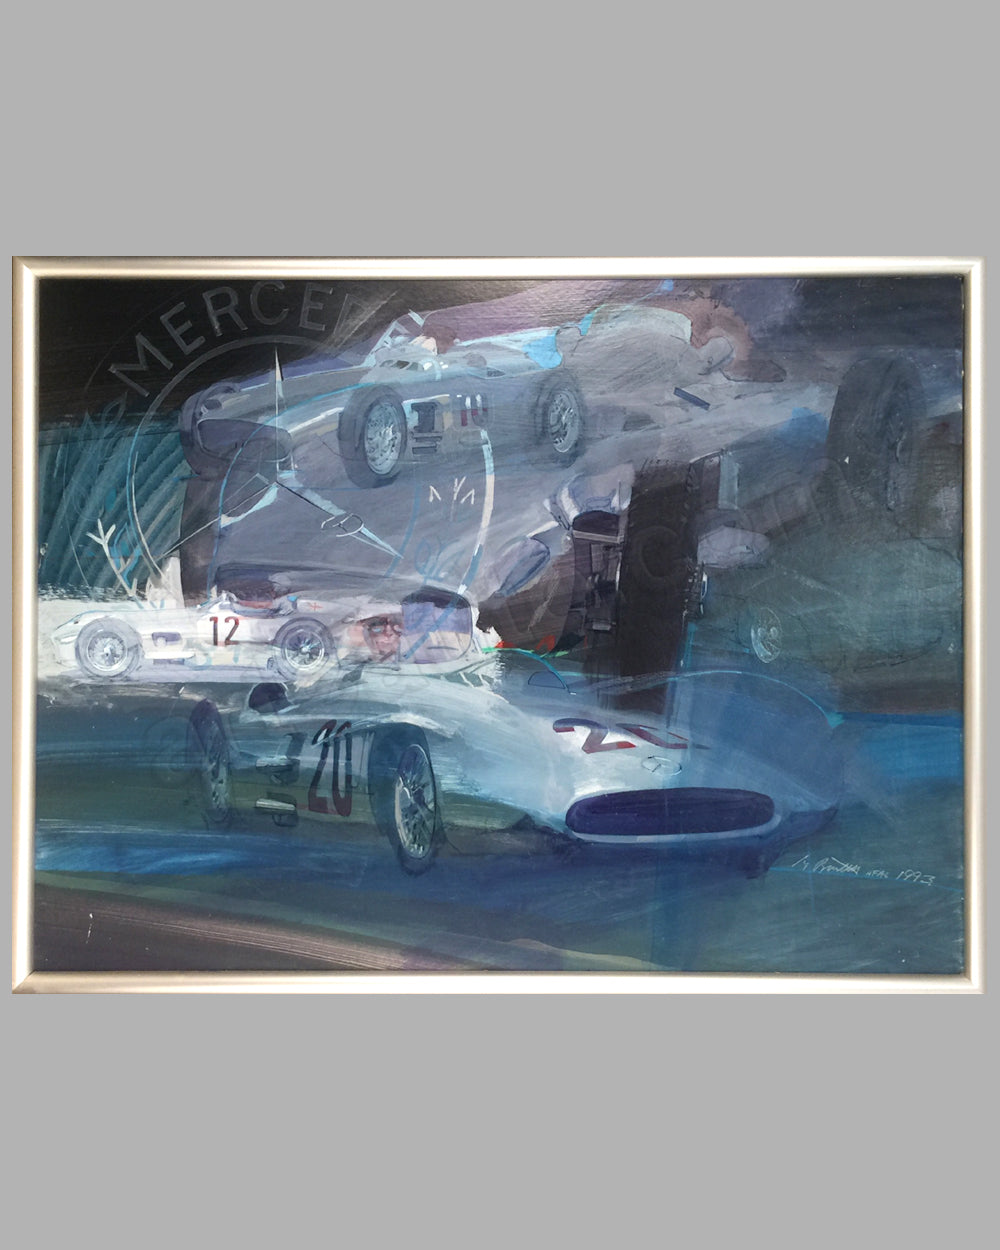 Mercedes-Benz Grand Prix Cars painting by George Bentel